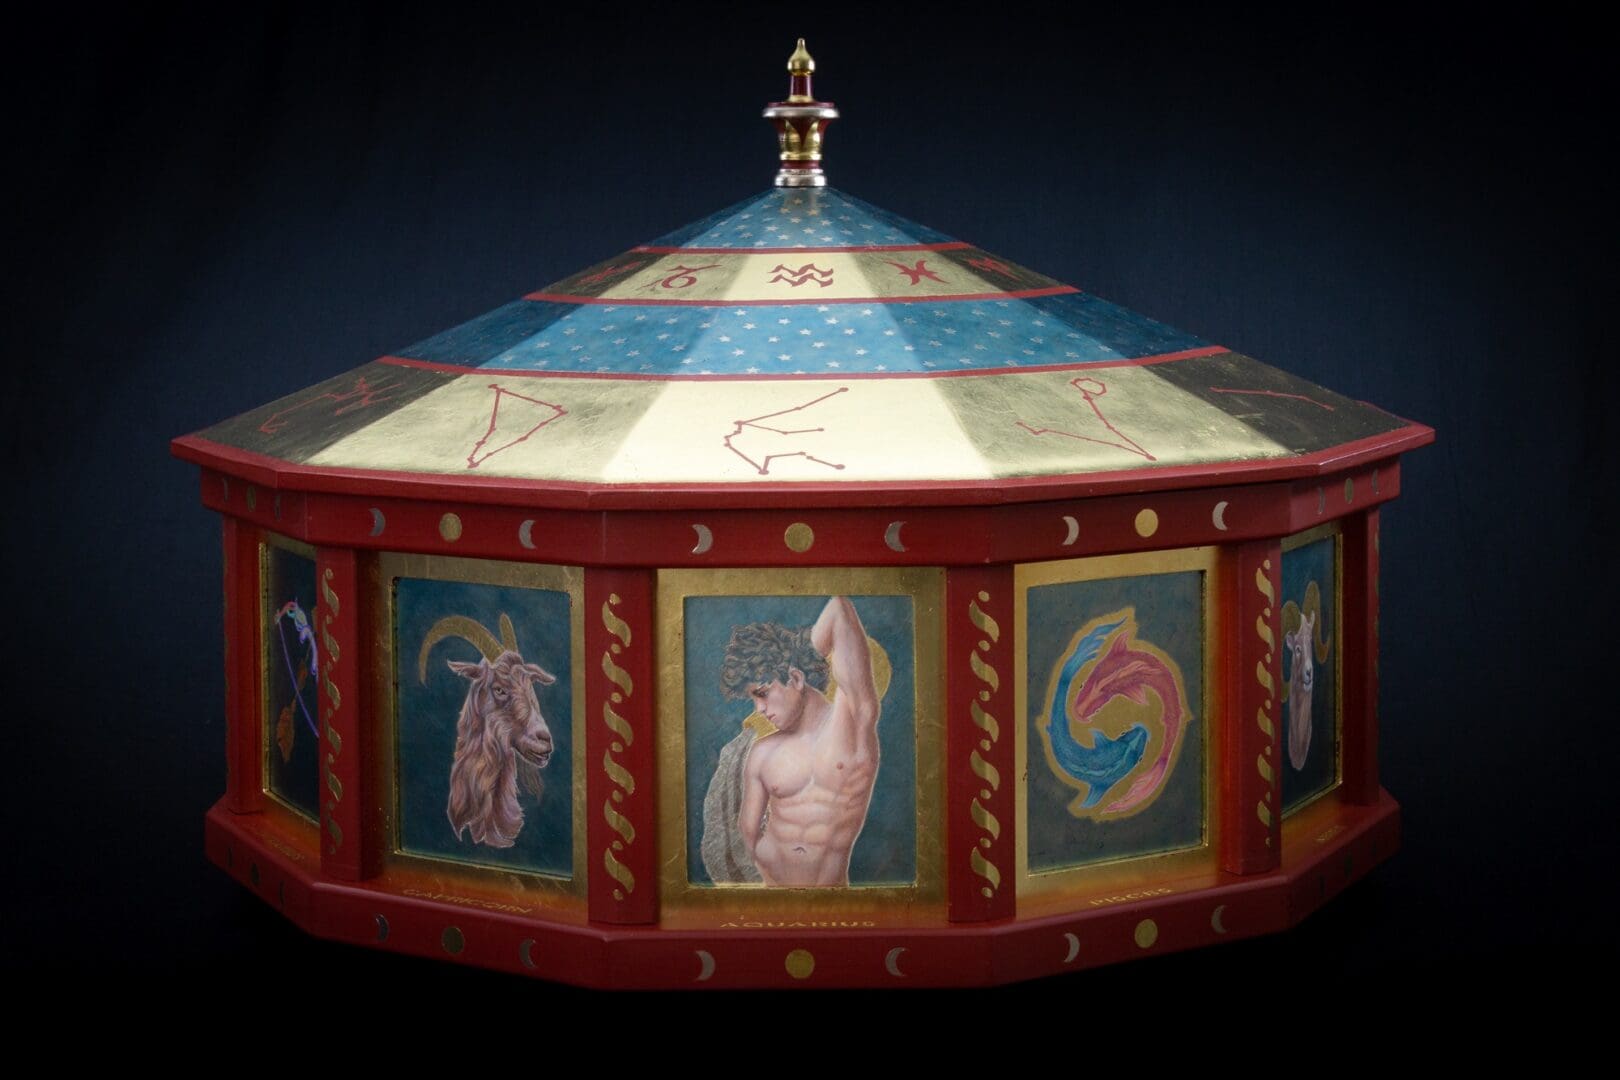 A painted carousel with various images of people.